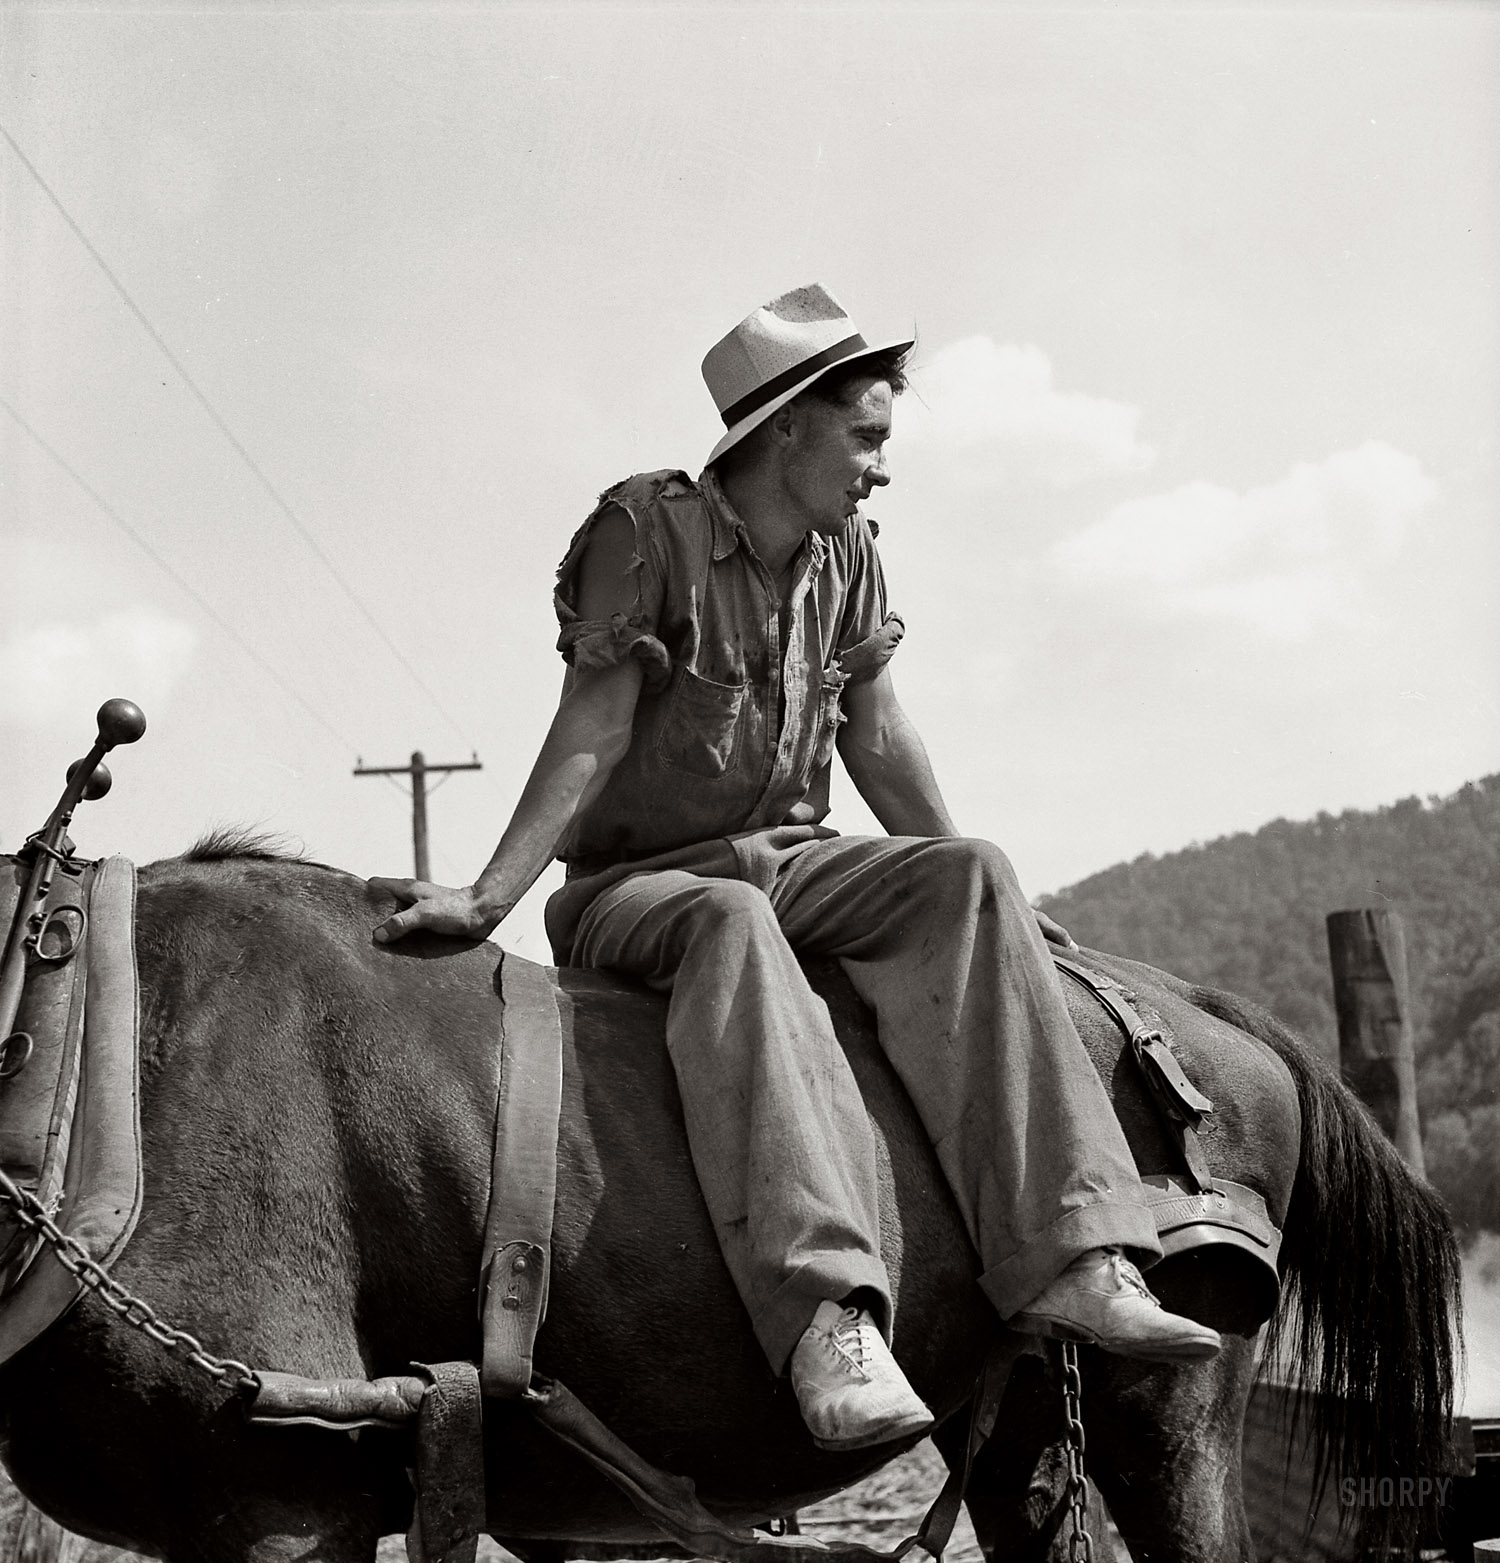 September 1938. Racine, West Virginia. "Farmer's son who helps make sorghum molasses from sugarcane." Photo by Marion Post Wolcott. View full size.